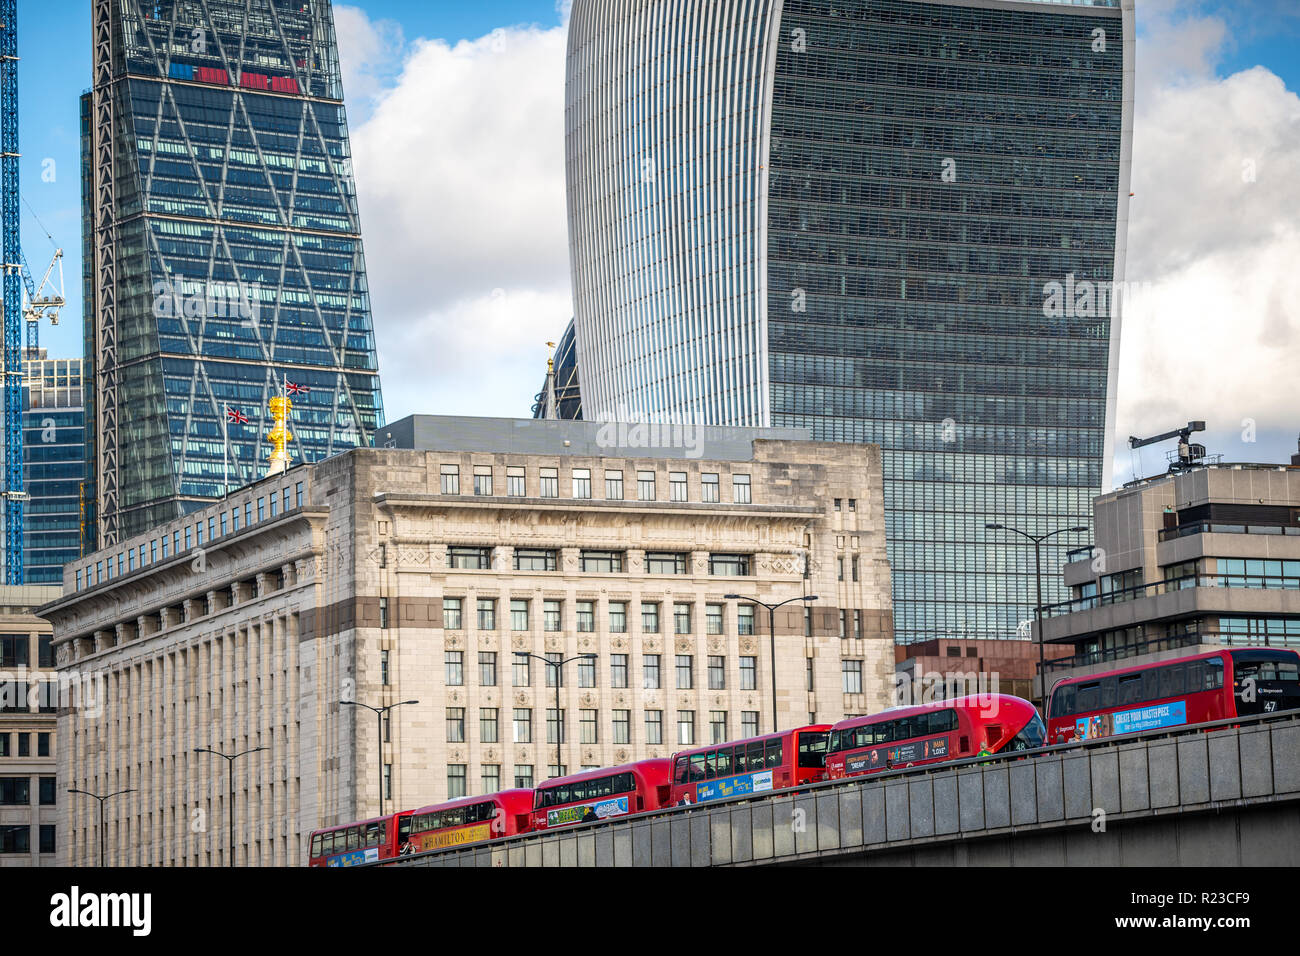 NOVEMBER 13, 2018, London, United Kingdom : Iconic new red London double decker passenger buses on London Bridge feat. Famous Office Buildings Stock Photo